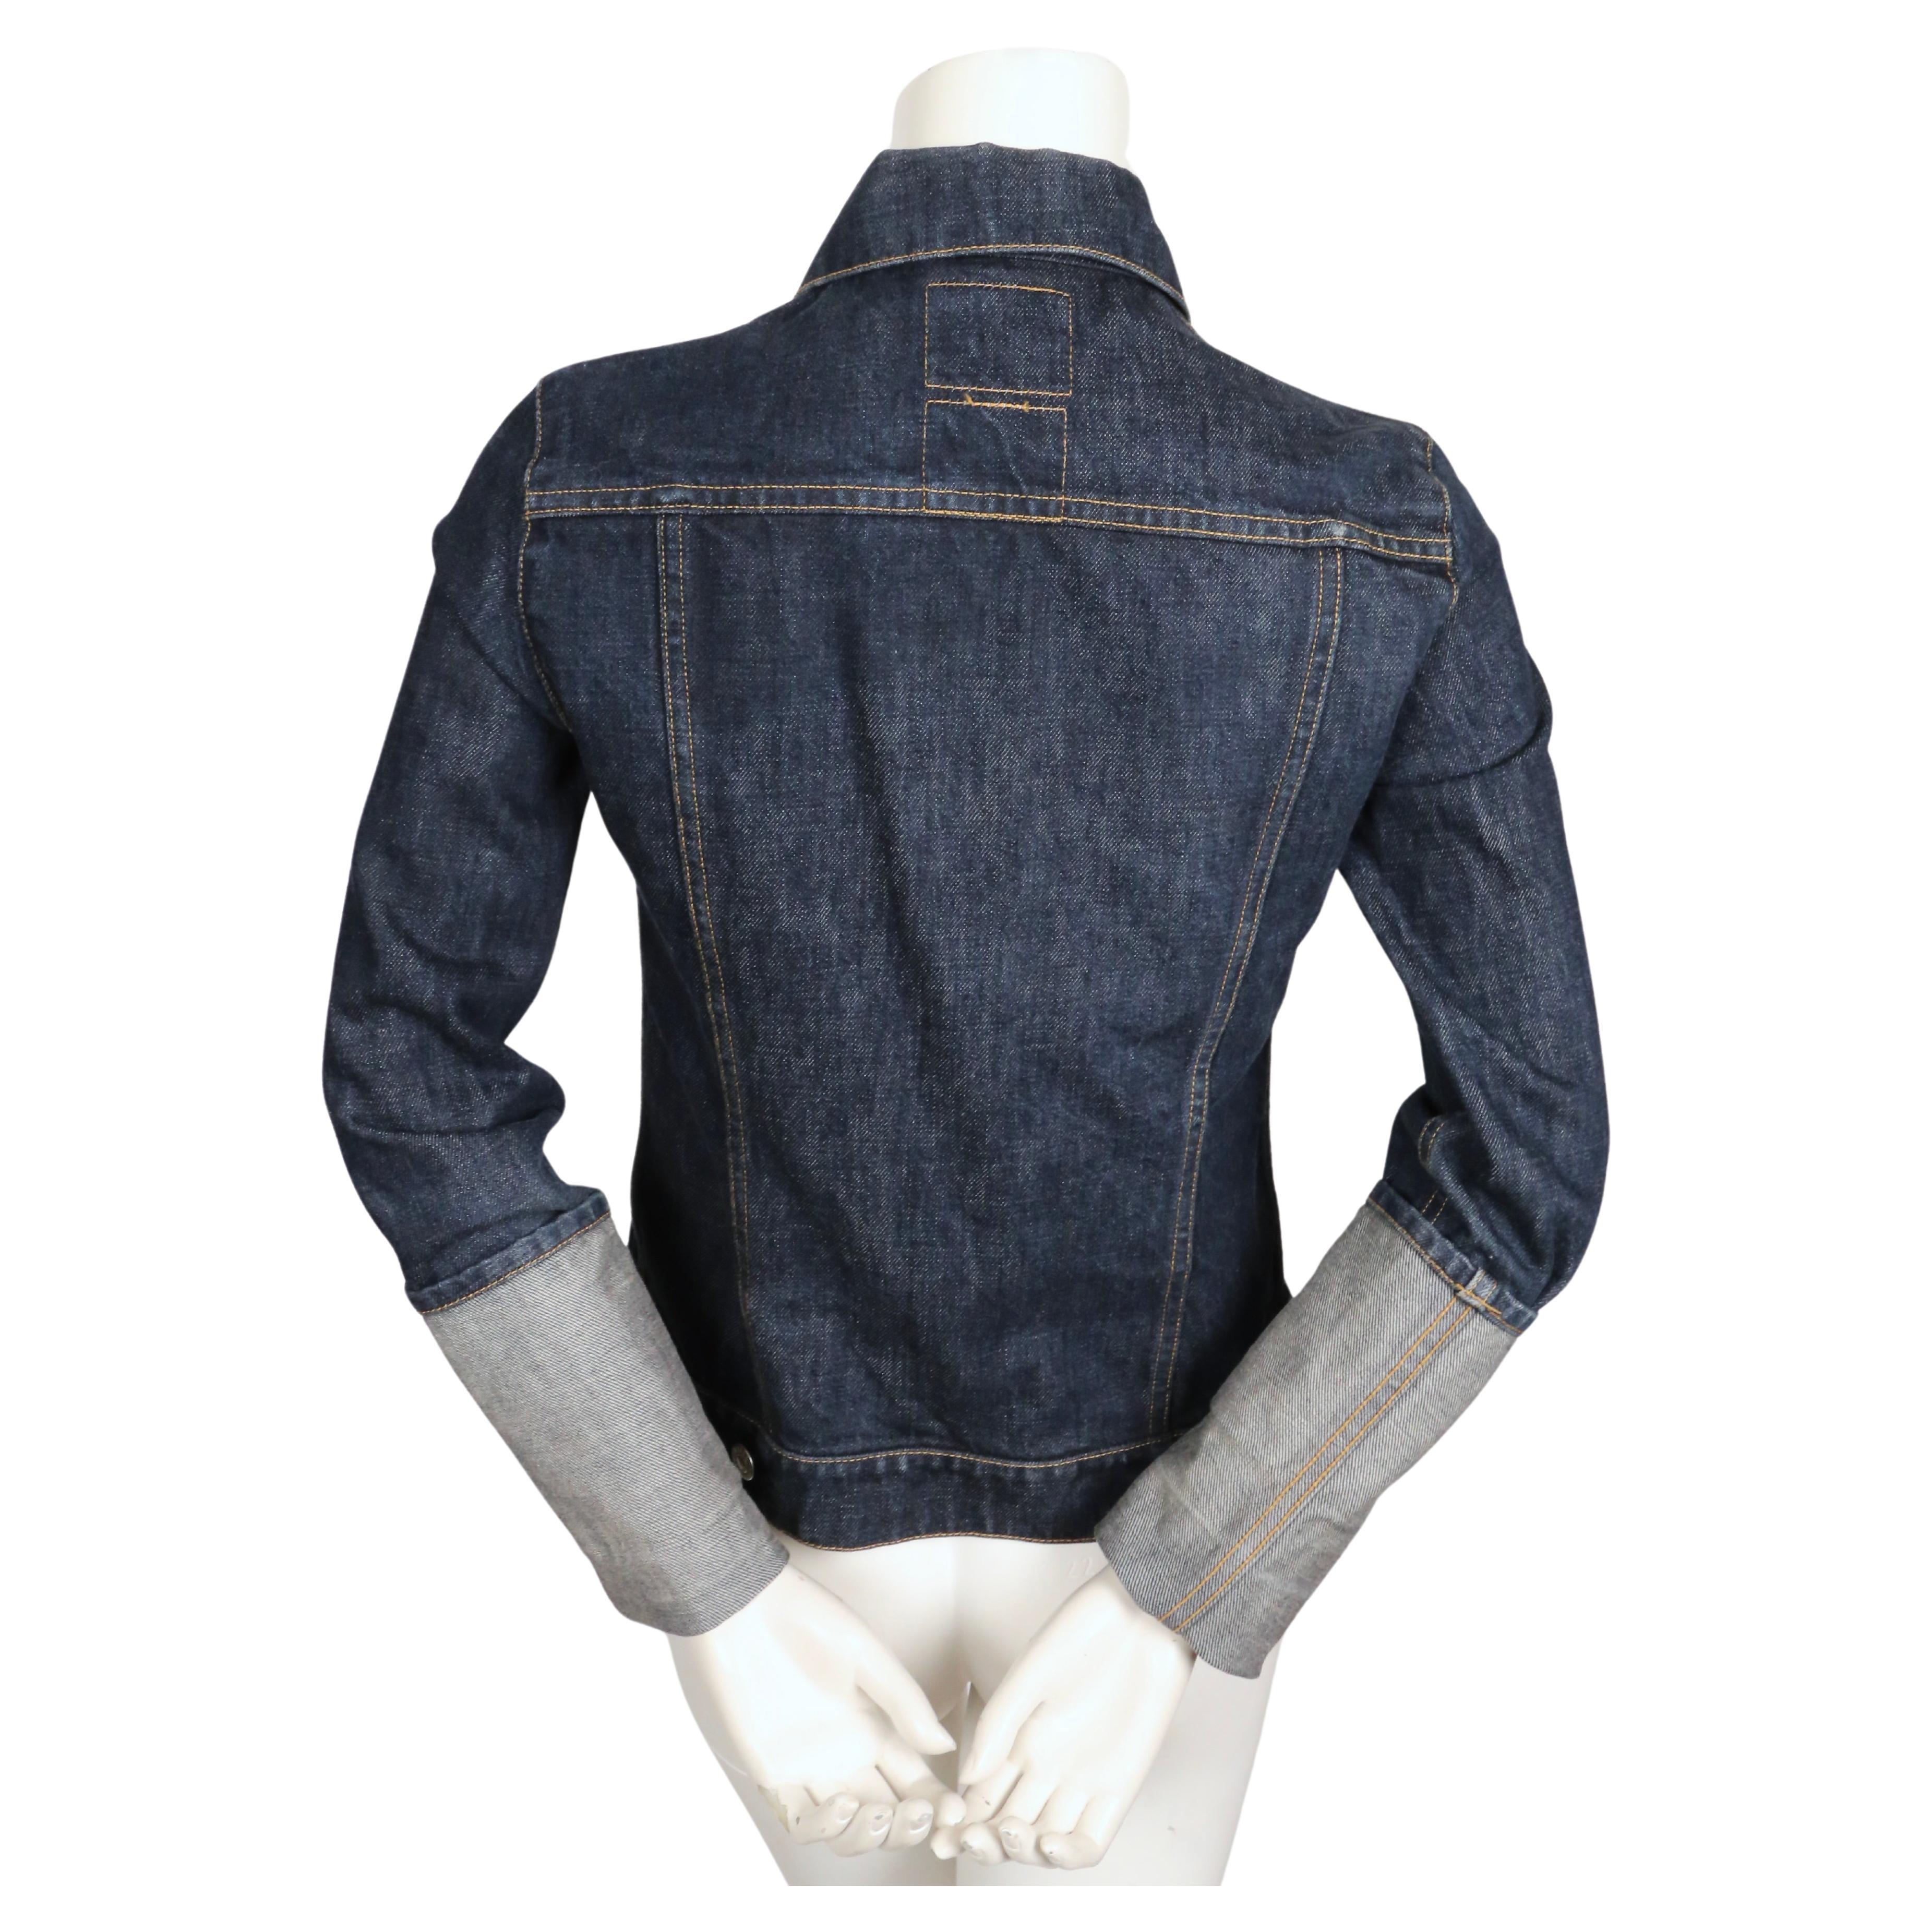 1990's HELMUT LANG classic denim jacket with extra long turn up cuffs For Sale 2